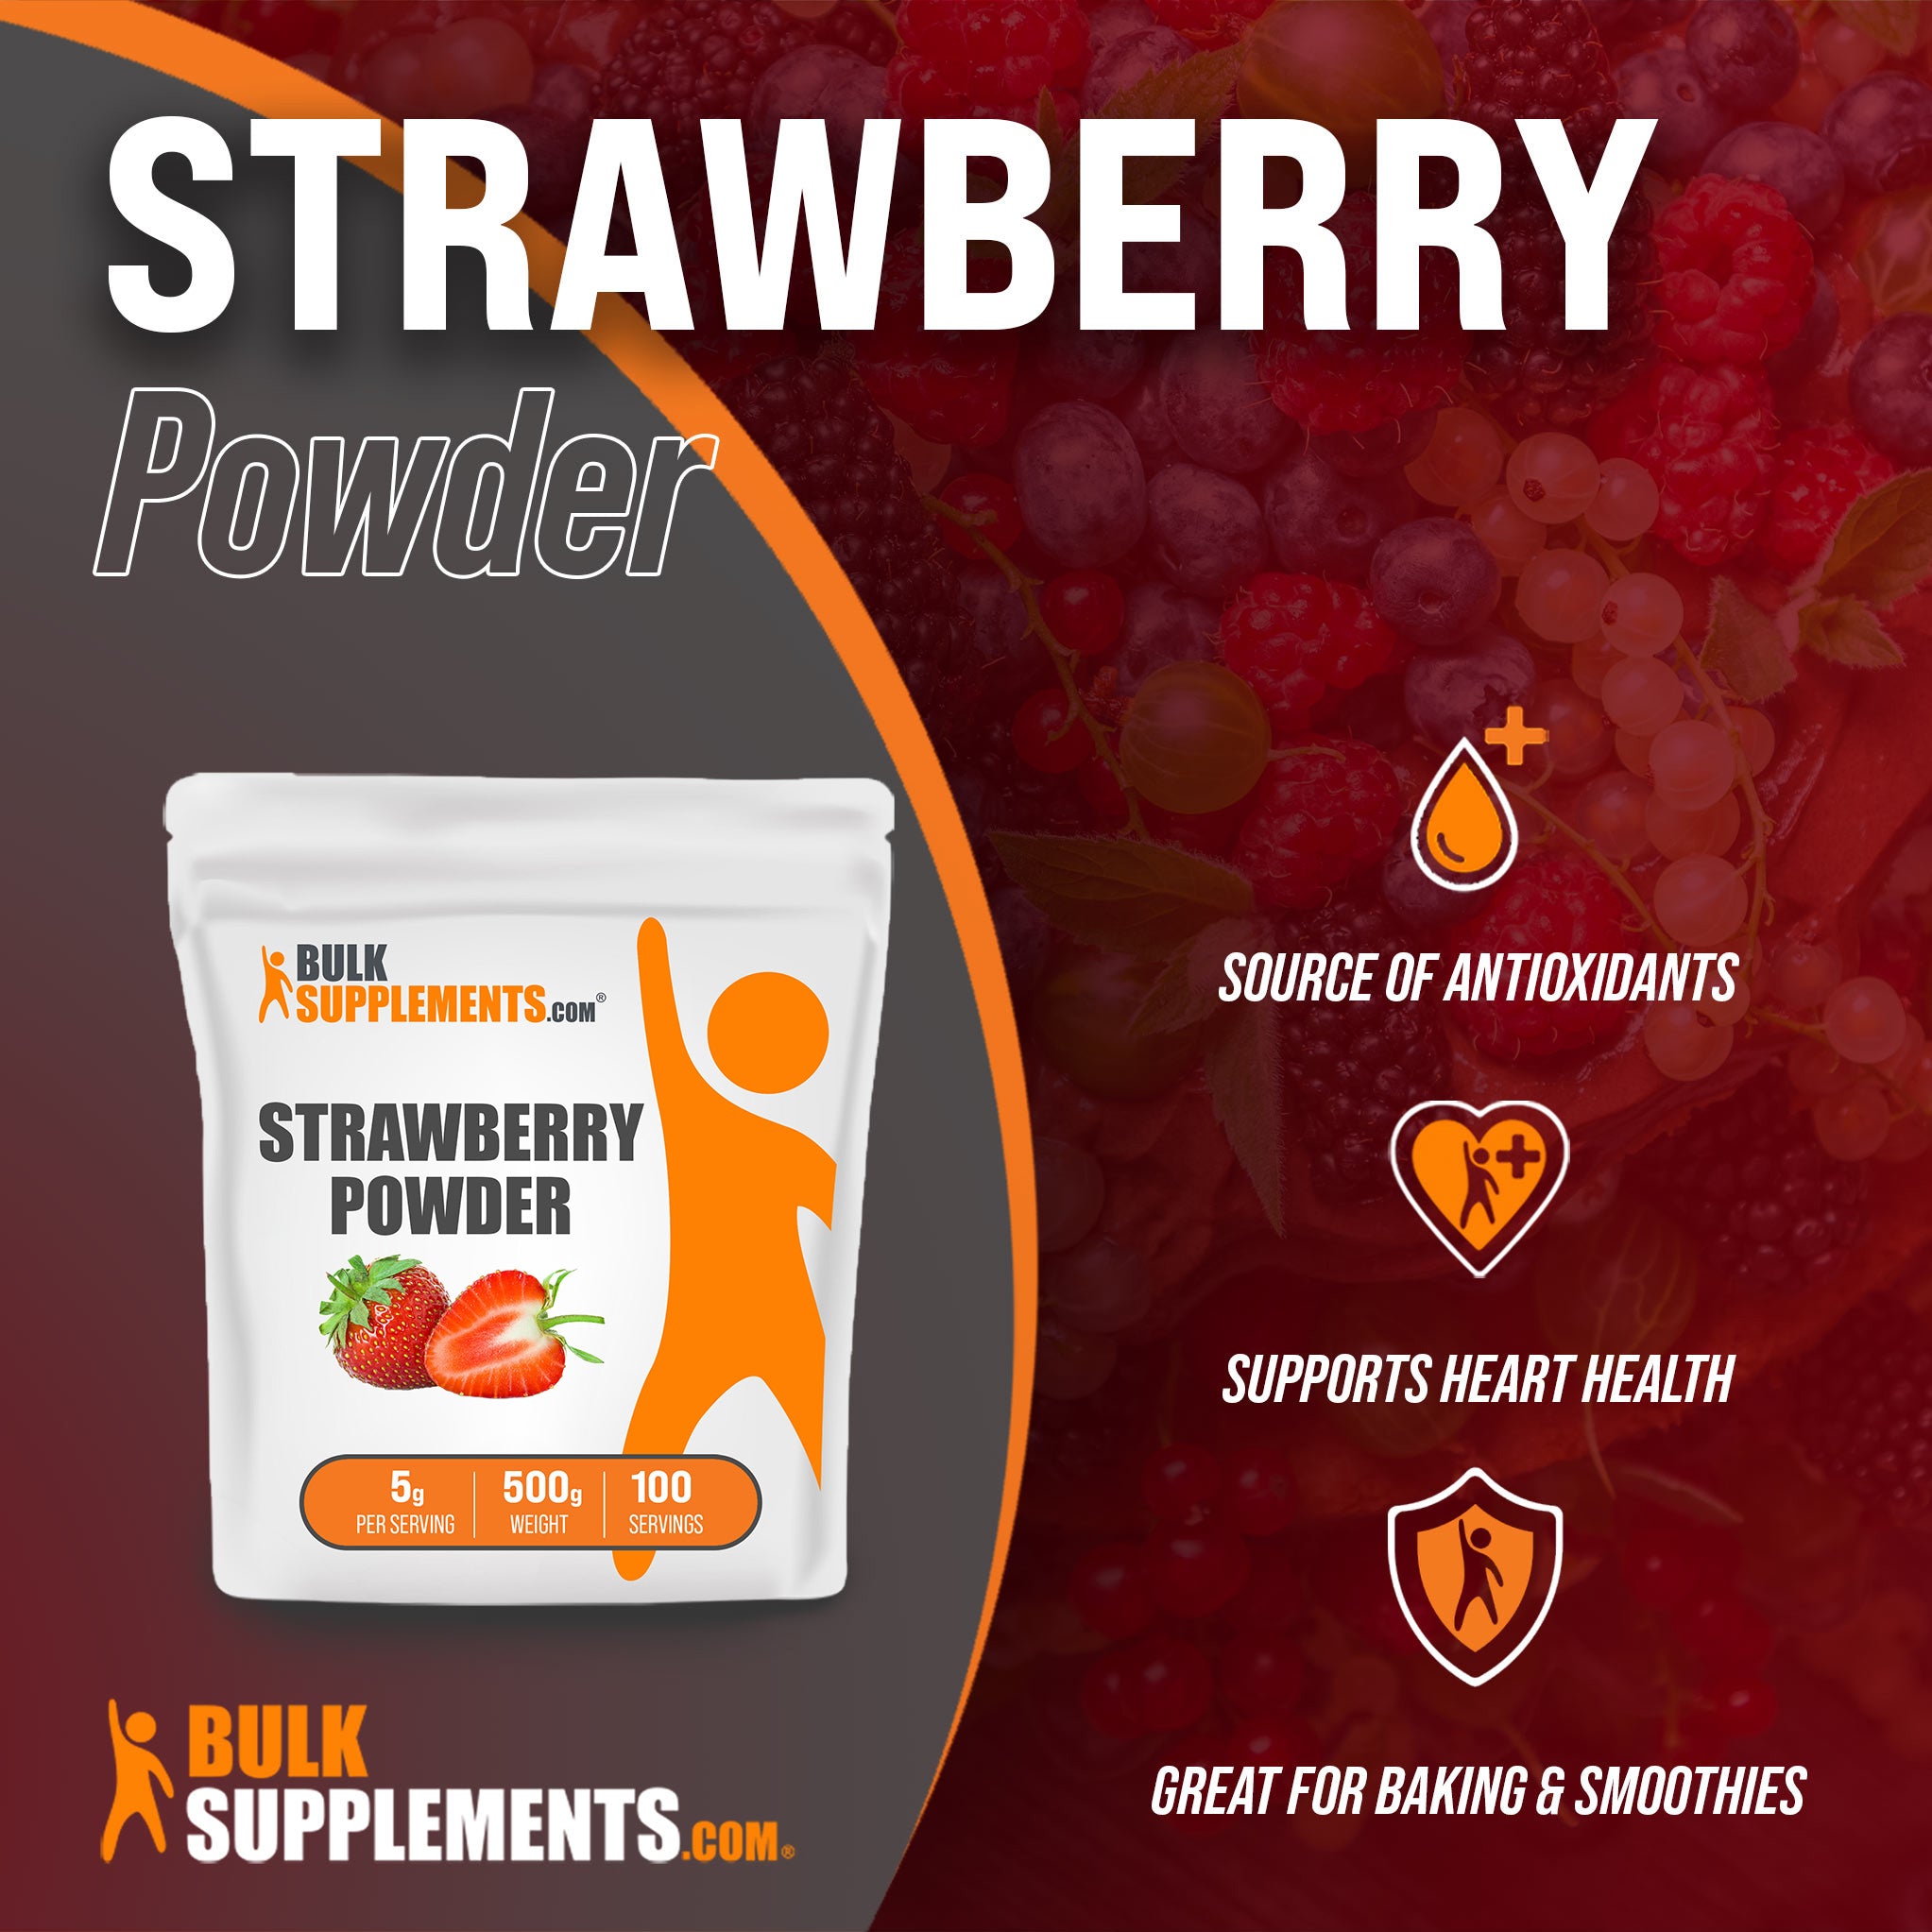 Benefits of Strawberry Powder: source of antioxidants, supports heart health, great for baking and smoothies